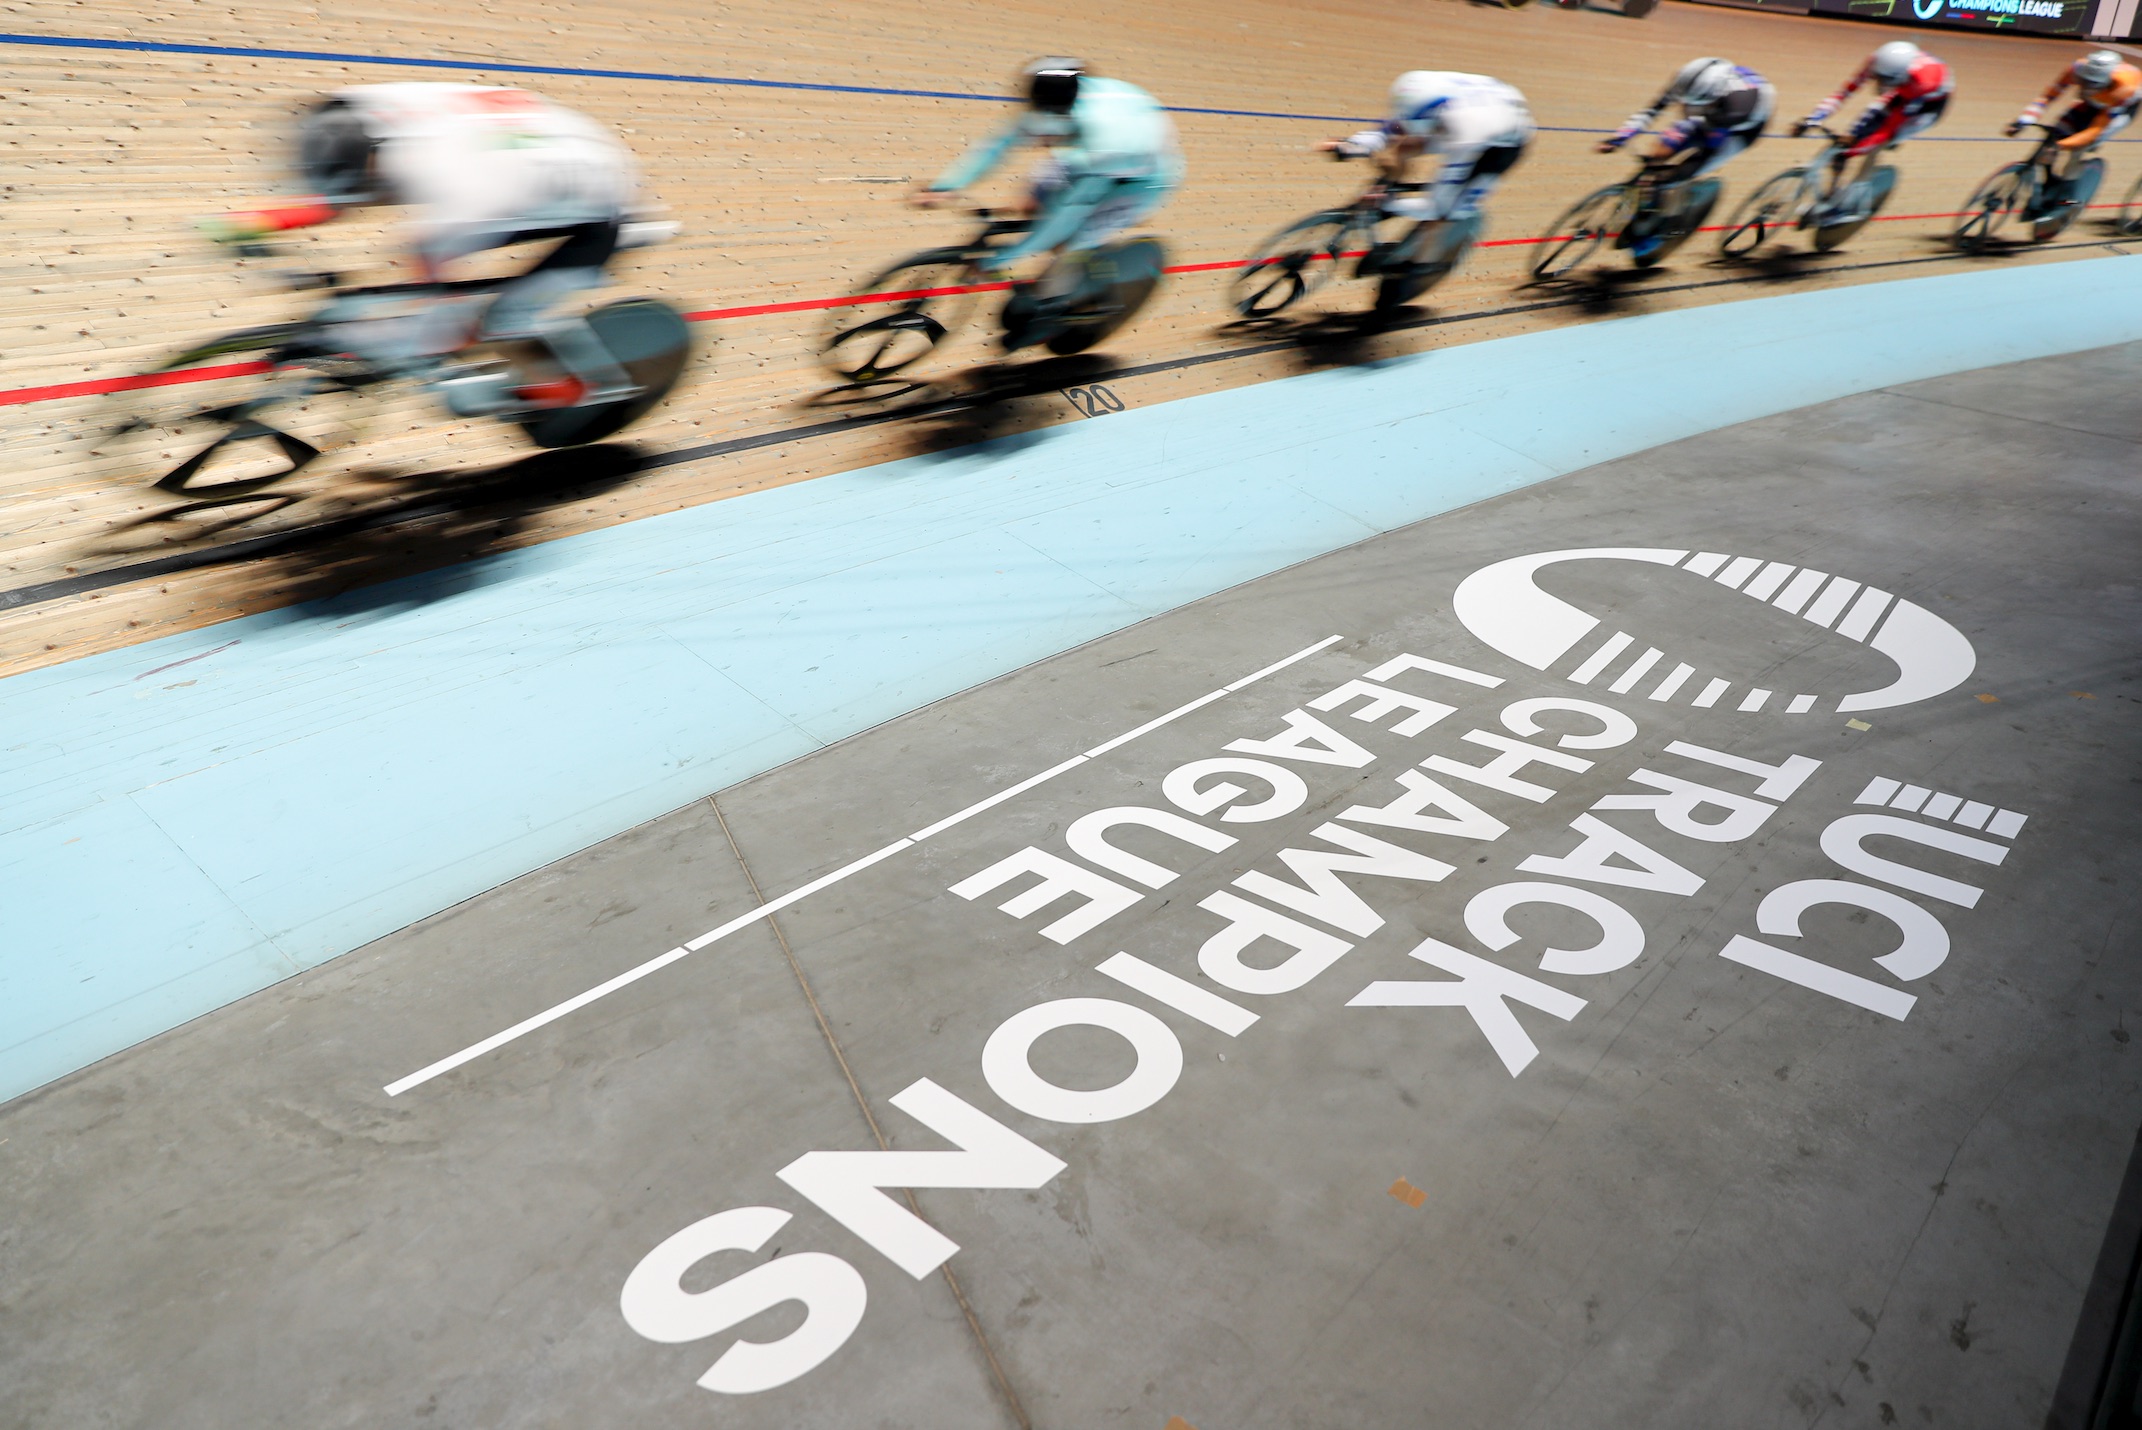 Track cyclists racing in a velodrome over the UCI Track Champions League logo.